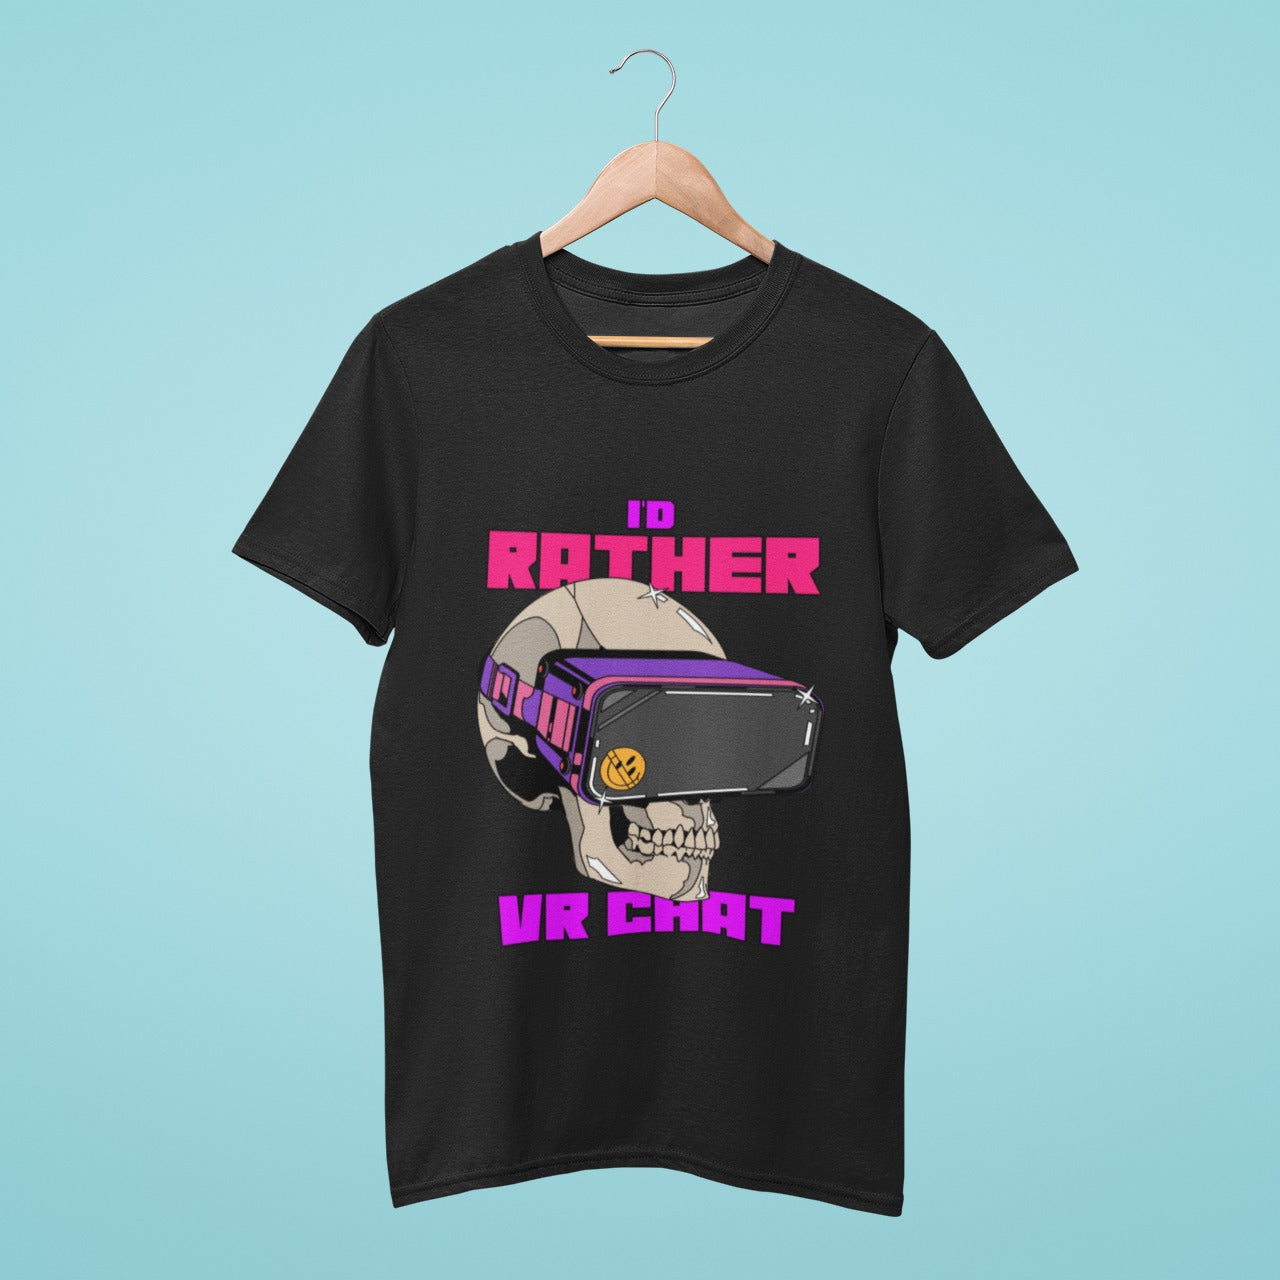 Elevate your style with our black t-shirt featuring a skull in VR goggles and "I'd Rather VR Chat" slogan. Perfect for gamers, this high-quality and comfortable t-shirt is sure to turn heads. Order now and show off your love for virtual reality gaming!